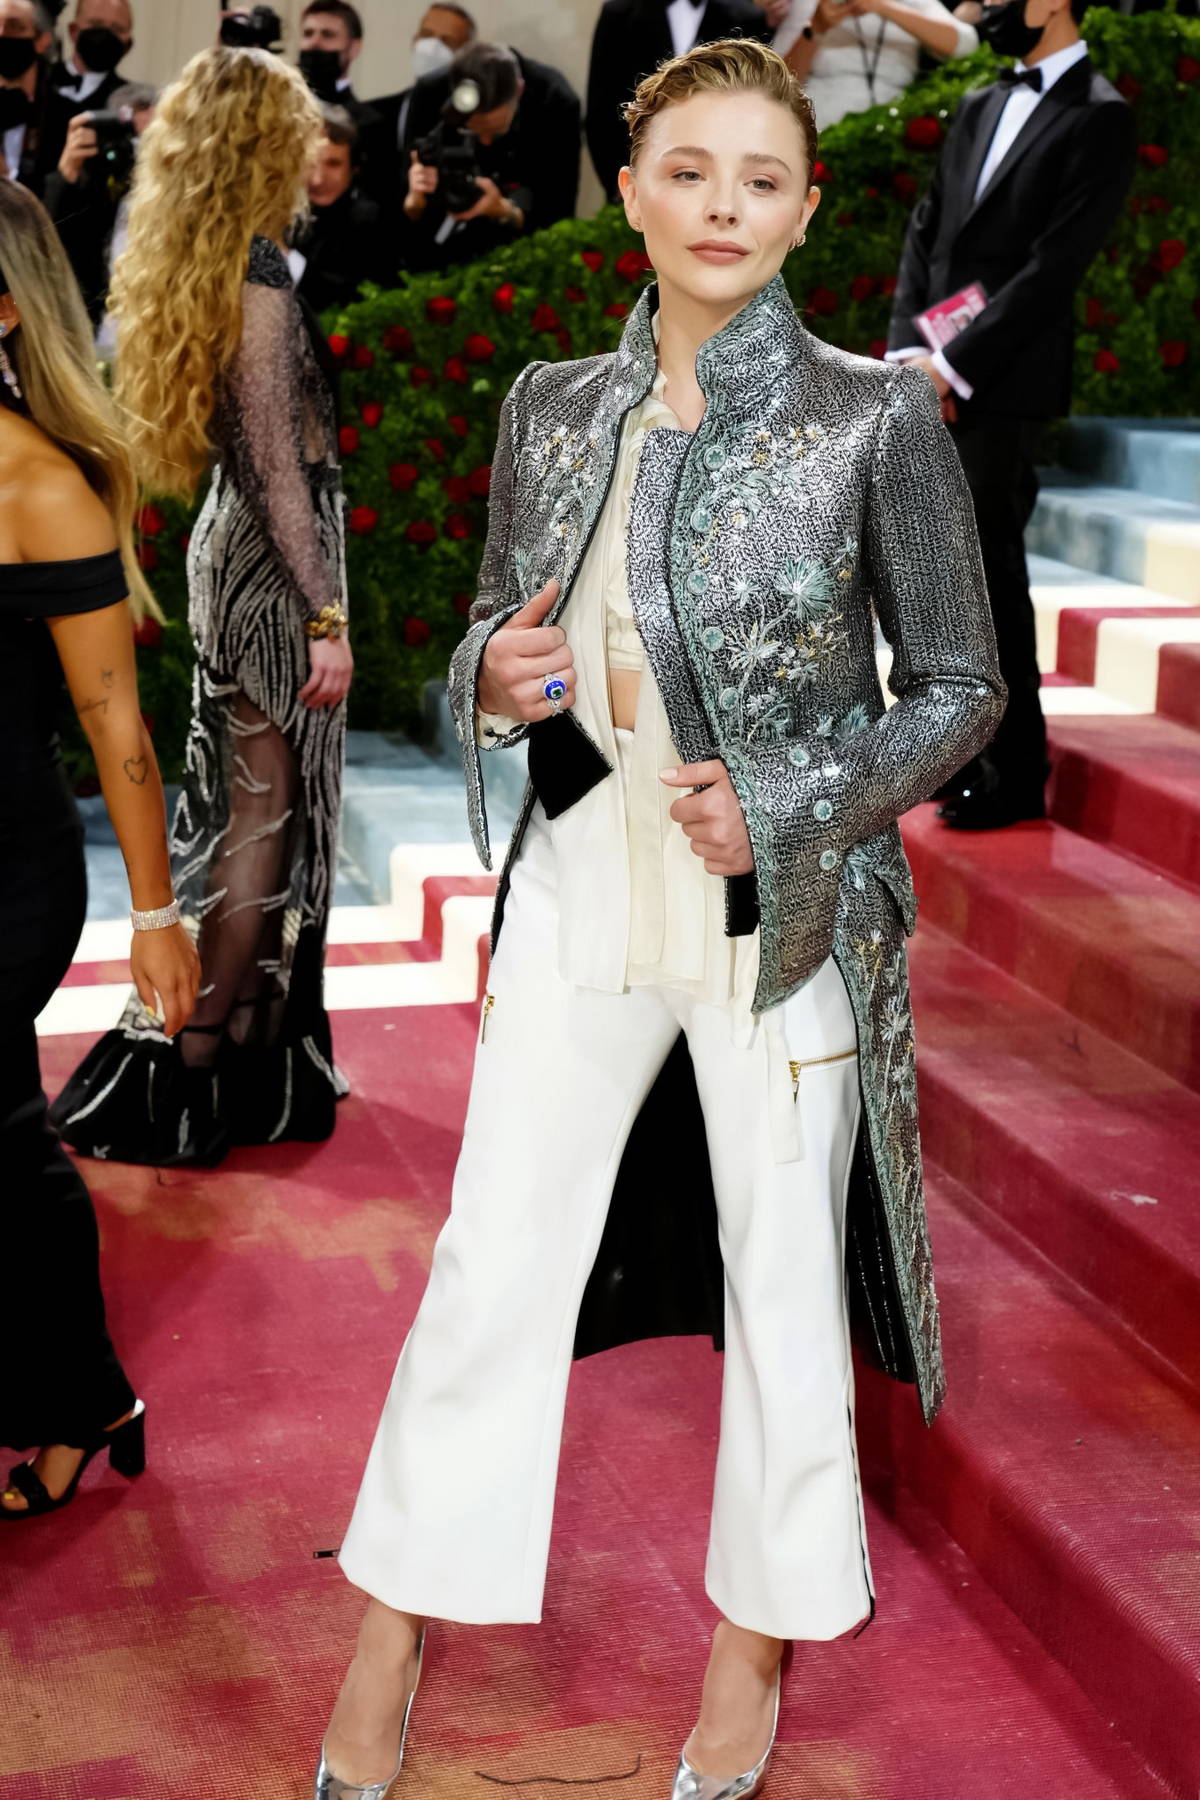 Chloe Moretz Met Gala After Party May 2, 2022 – Star Style